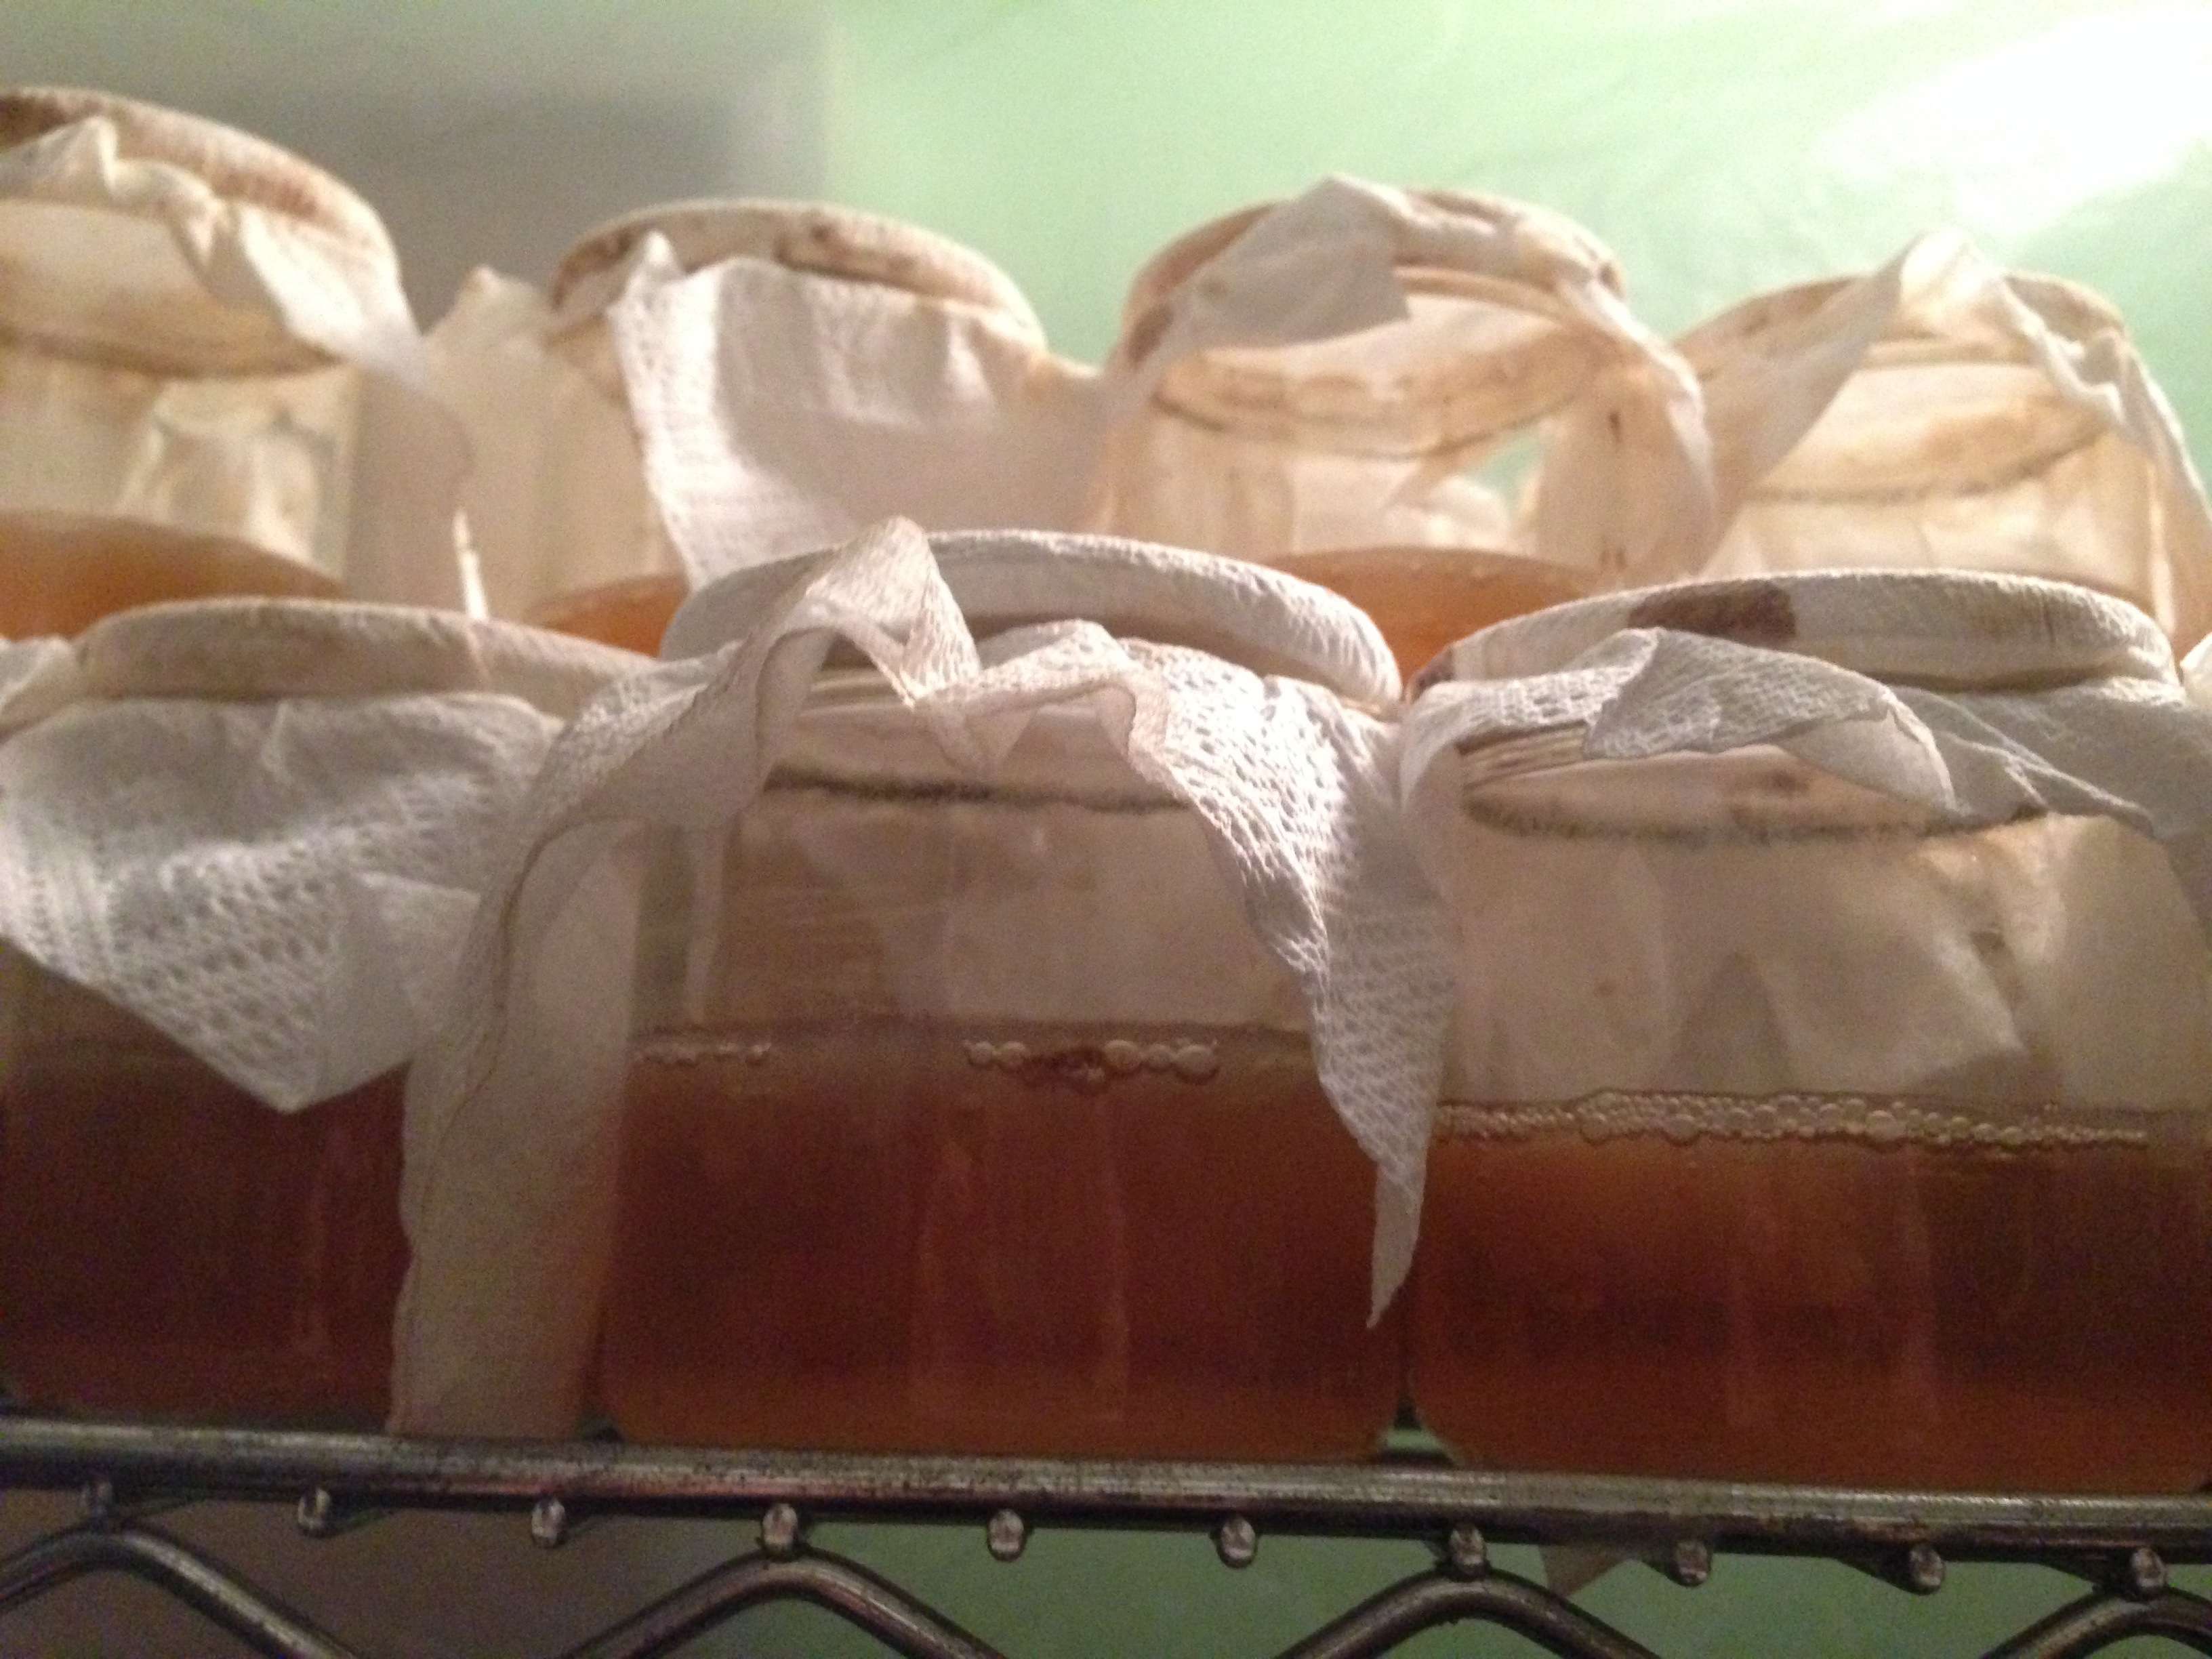 It’s alive! Jars of kombucha are brewing in this Brooklyn office.